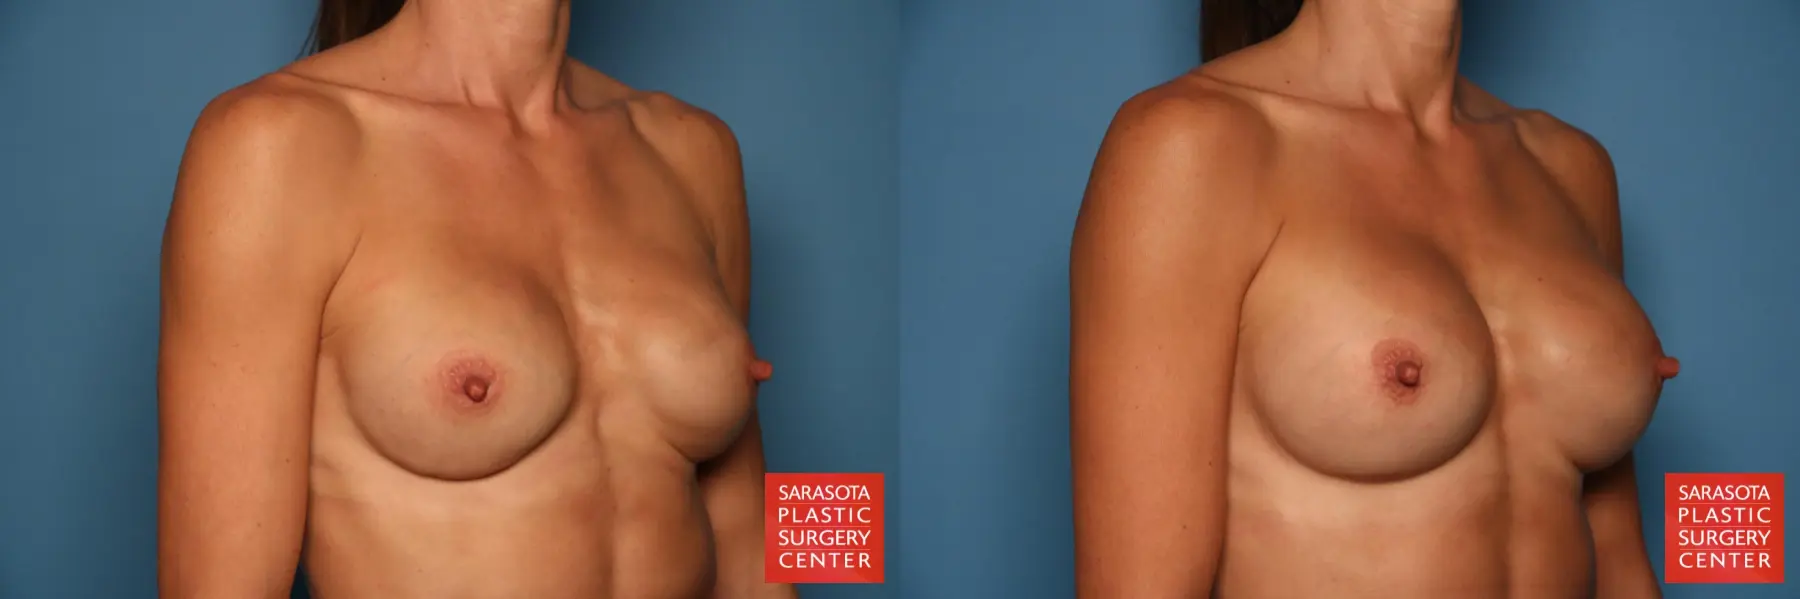 Breast Implant Exchange: Patient 1 - Before and After 4